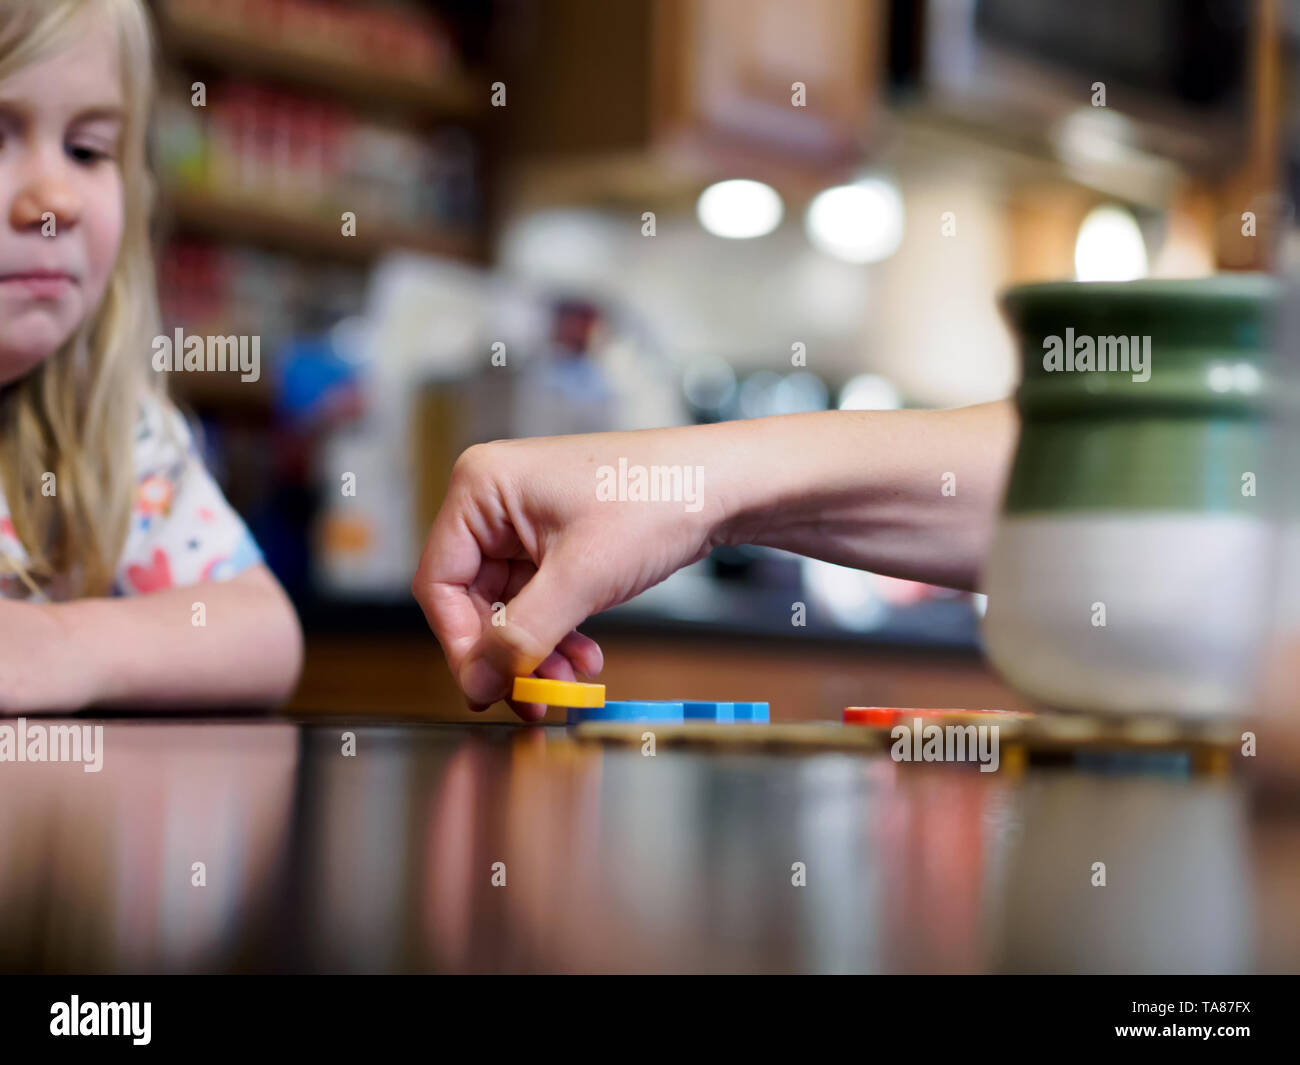 A mothers hand arranges plastic letters into words on a kitchen table while young daughter looks on from edge of frame. Shallow DOF. Stock Photo